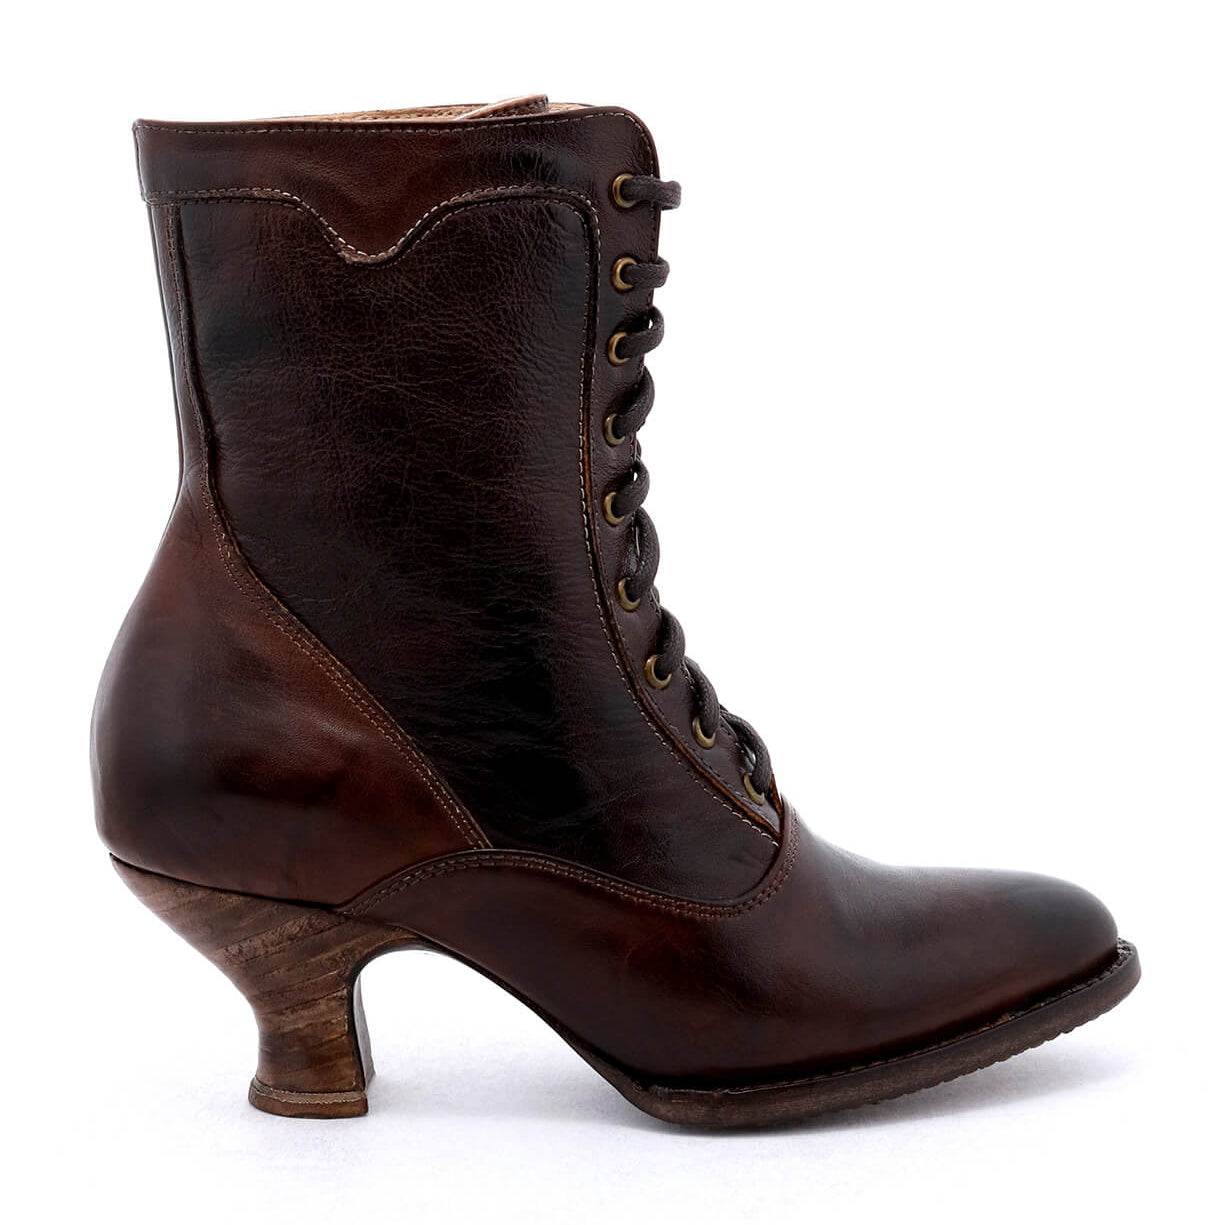 An Eleanor women's brown leather boot with wooden heel, hand dyed to ensure uncompromising quality, crafted by Oak Tree Farms.